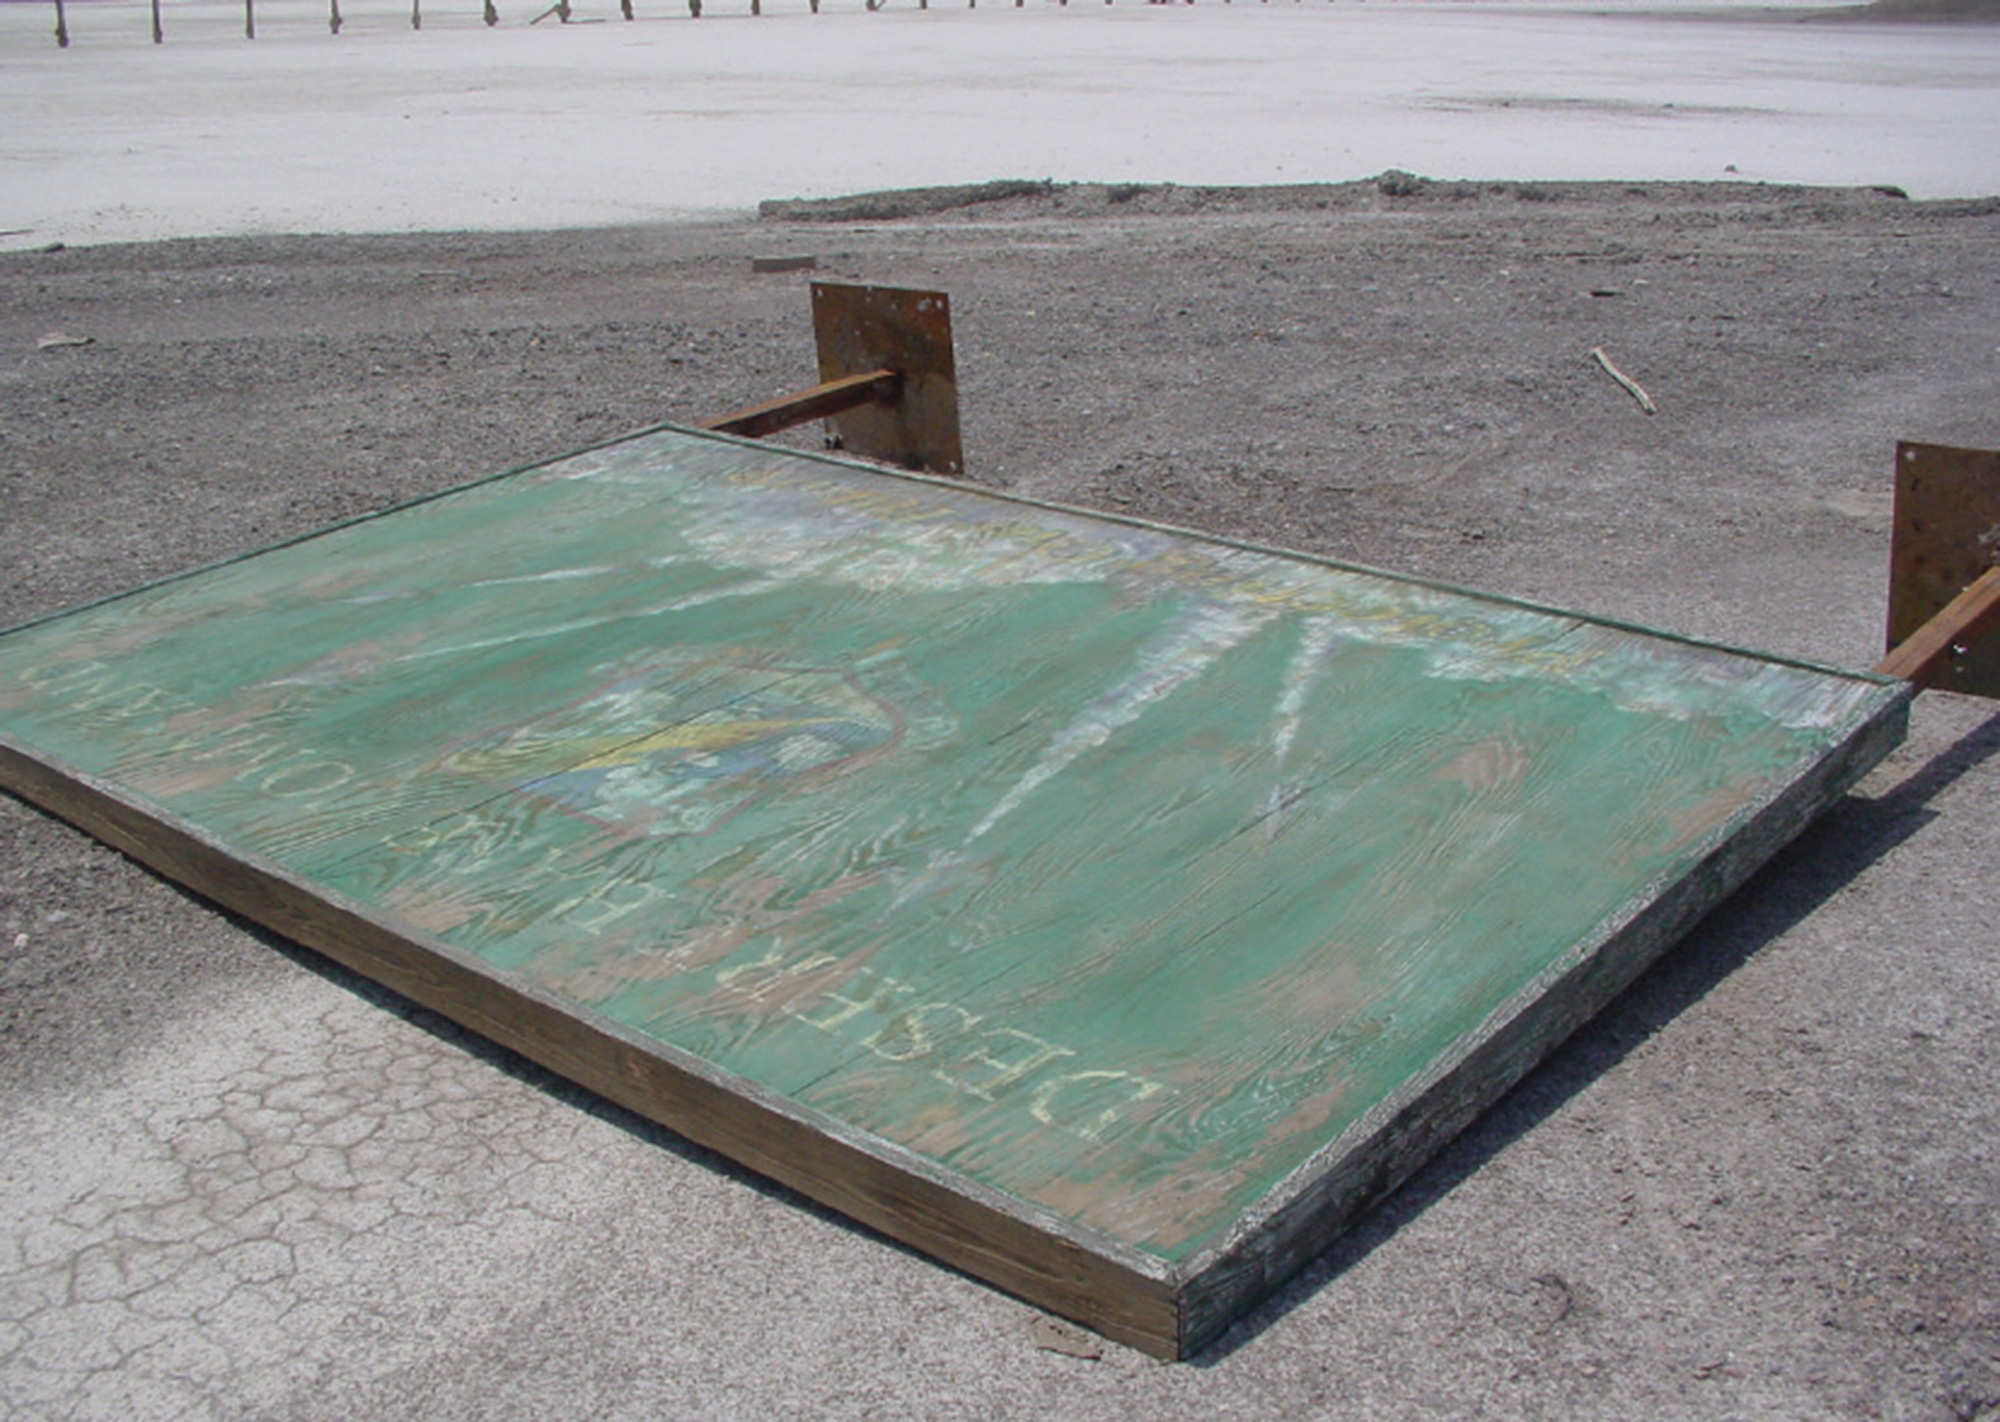 A photograph of a tipped-over wooden “Desert base command” sign.